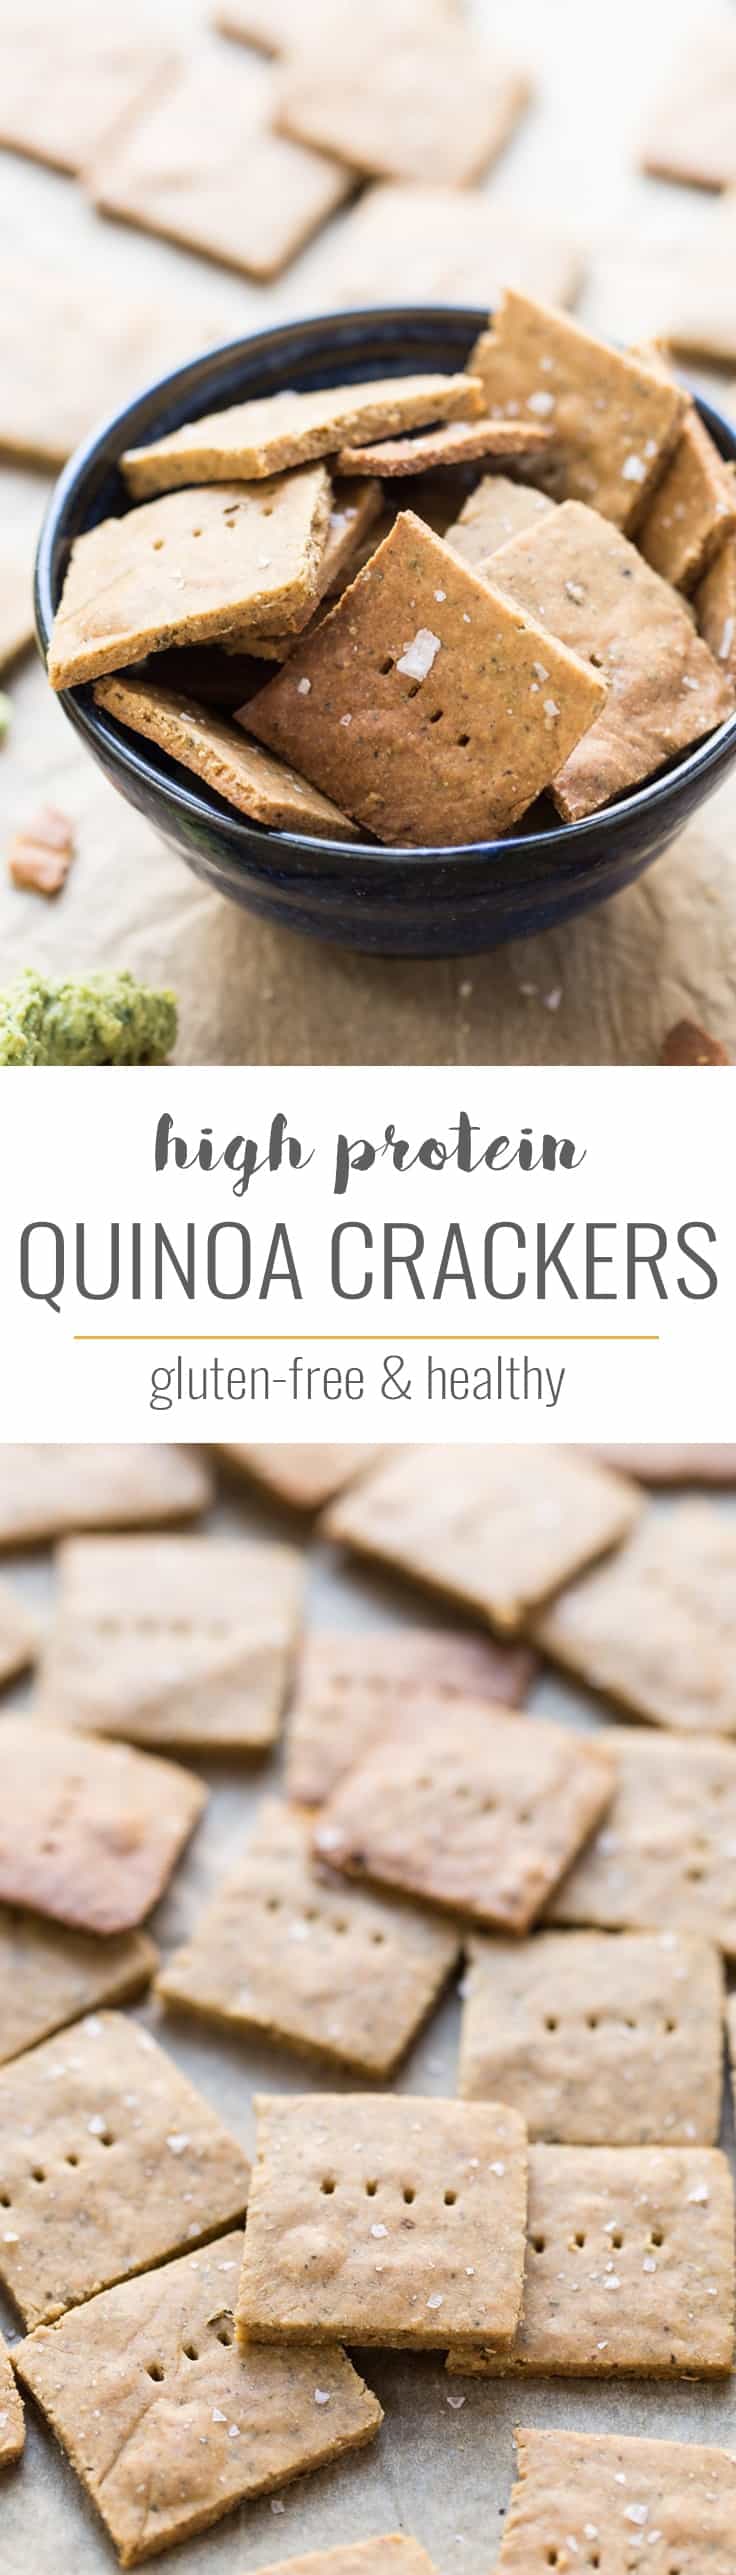 If you need a quick, healthy, high-protein snack, reach for these GLUTEN-FREE QUINOA Crackers! Easy to make, extra crispy and go with all your favorite dips!